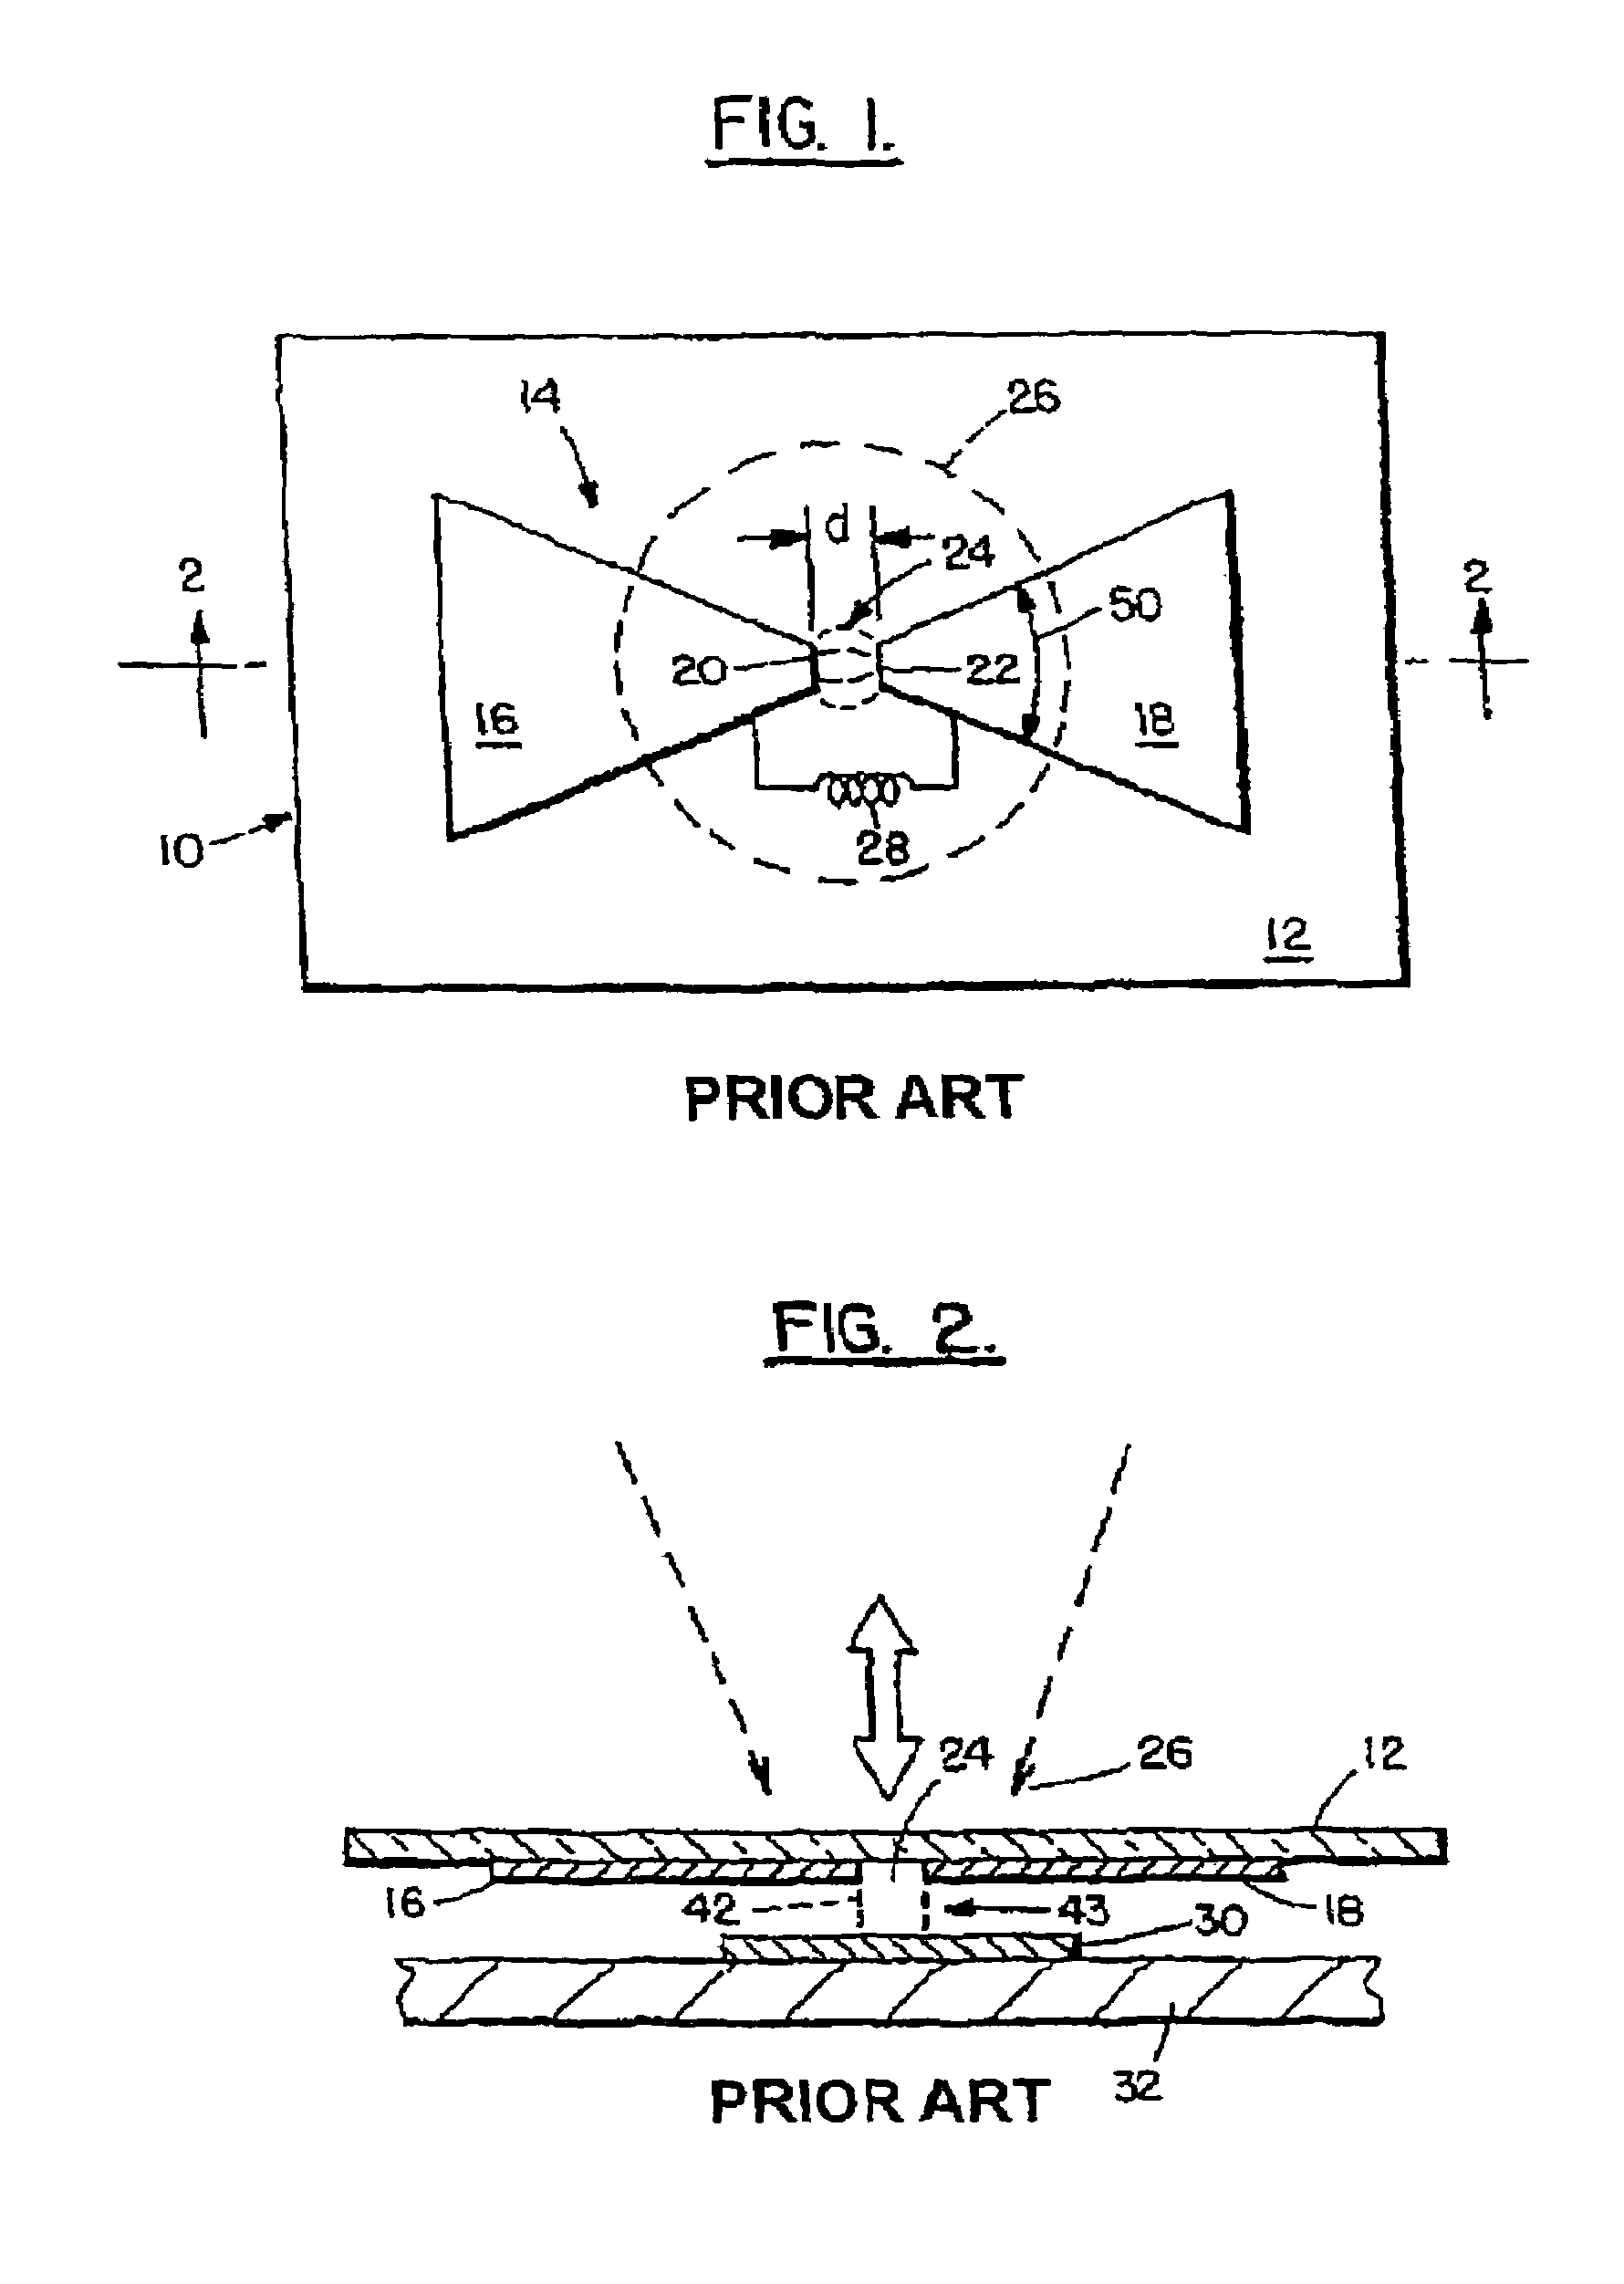 Optical disc head including a bowtie grating antenna and slider for optical focusing, and method for making